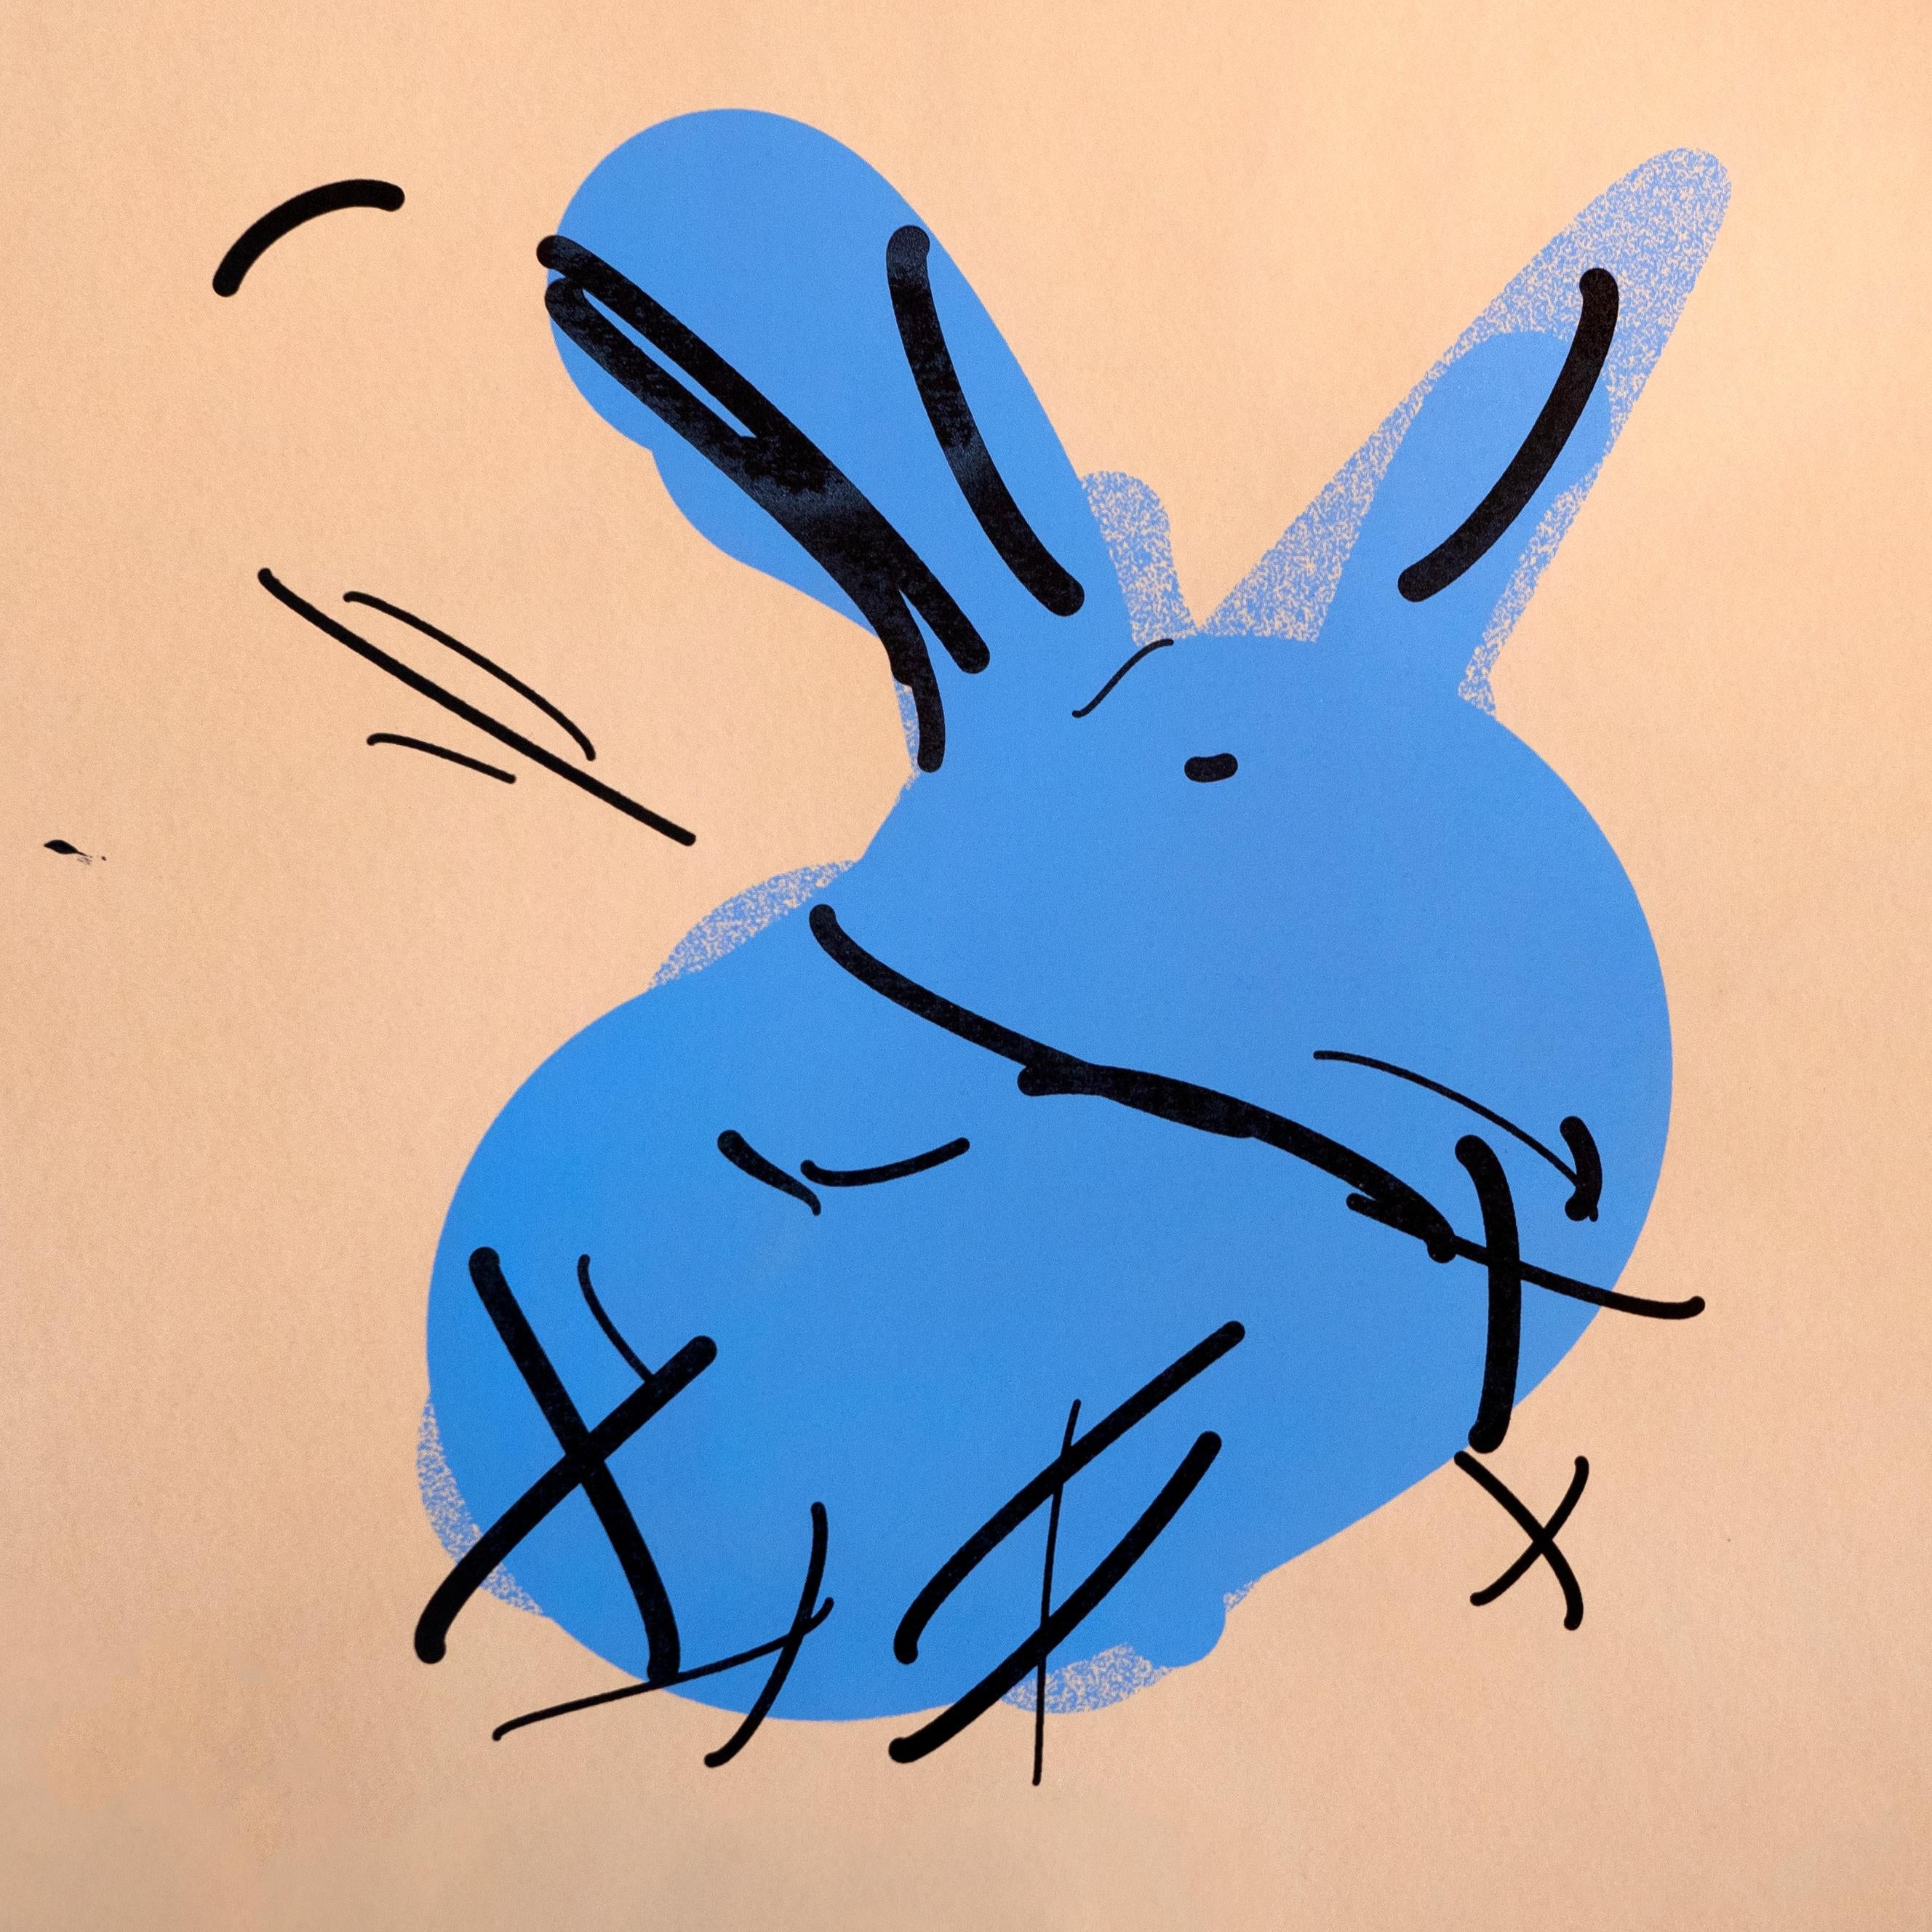 Rabbit Trial Proof 2 - Print by Tom White